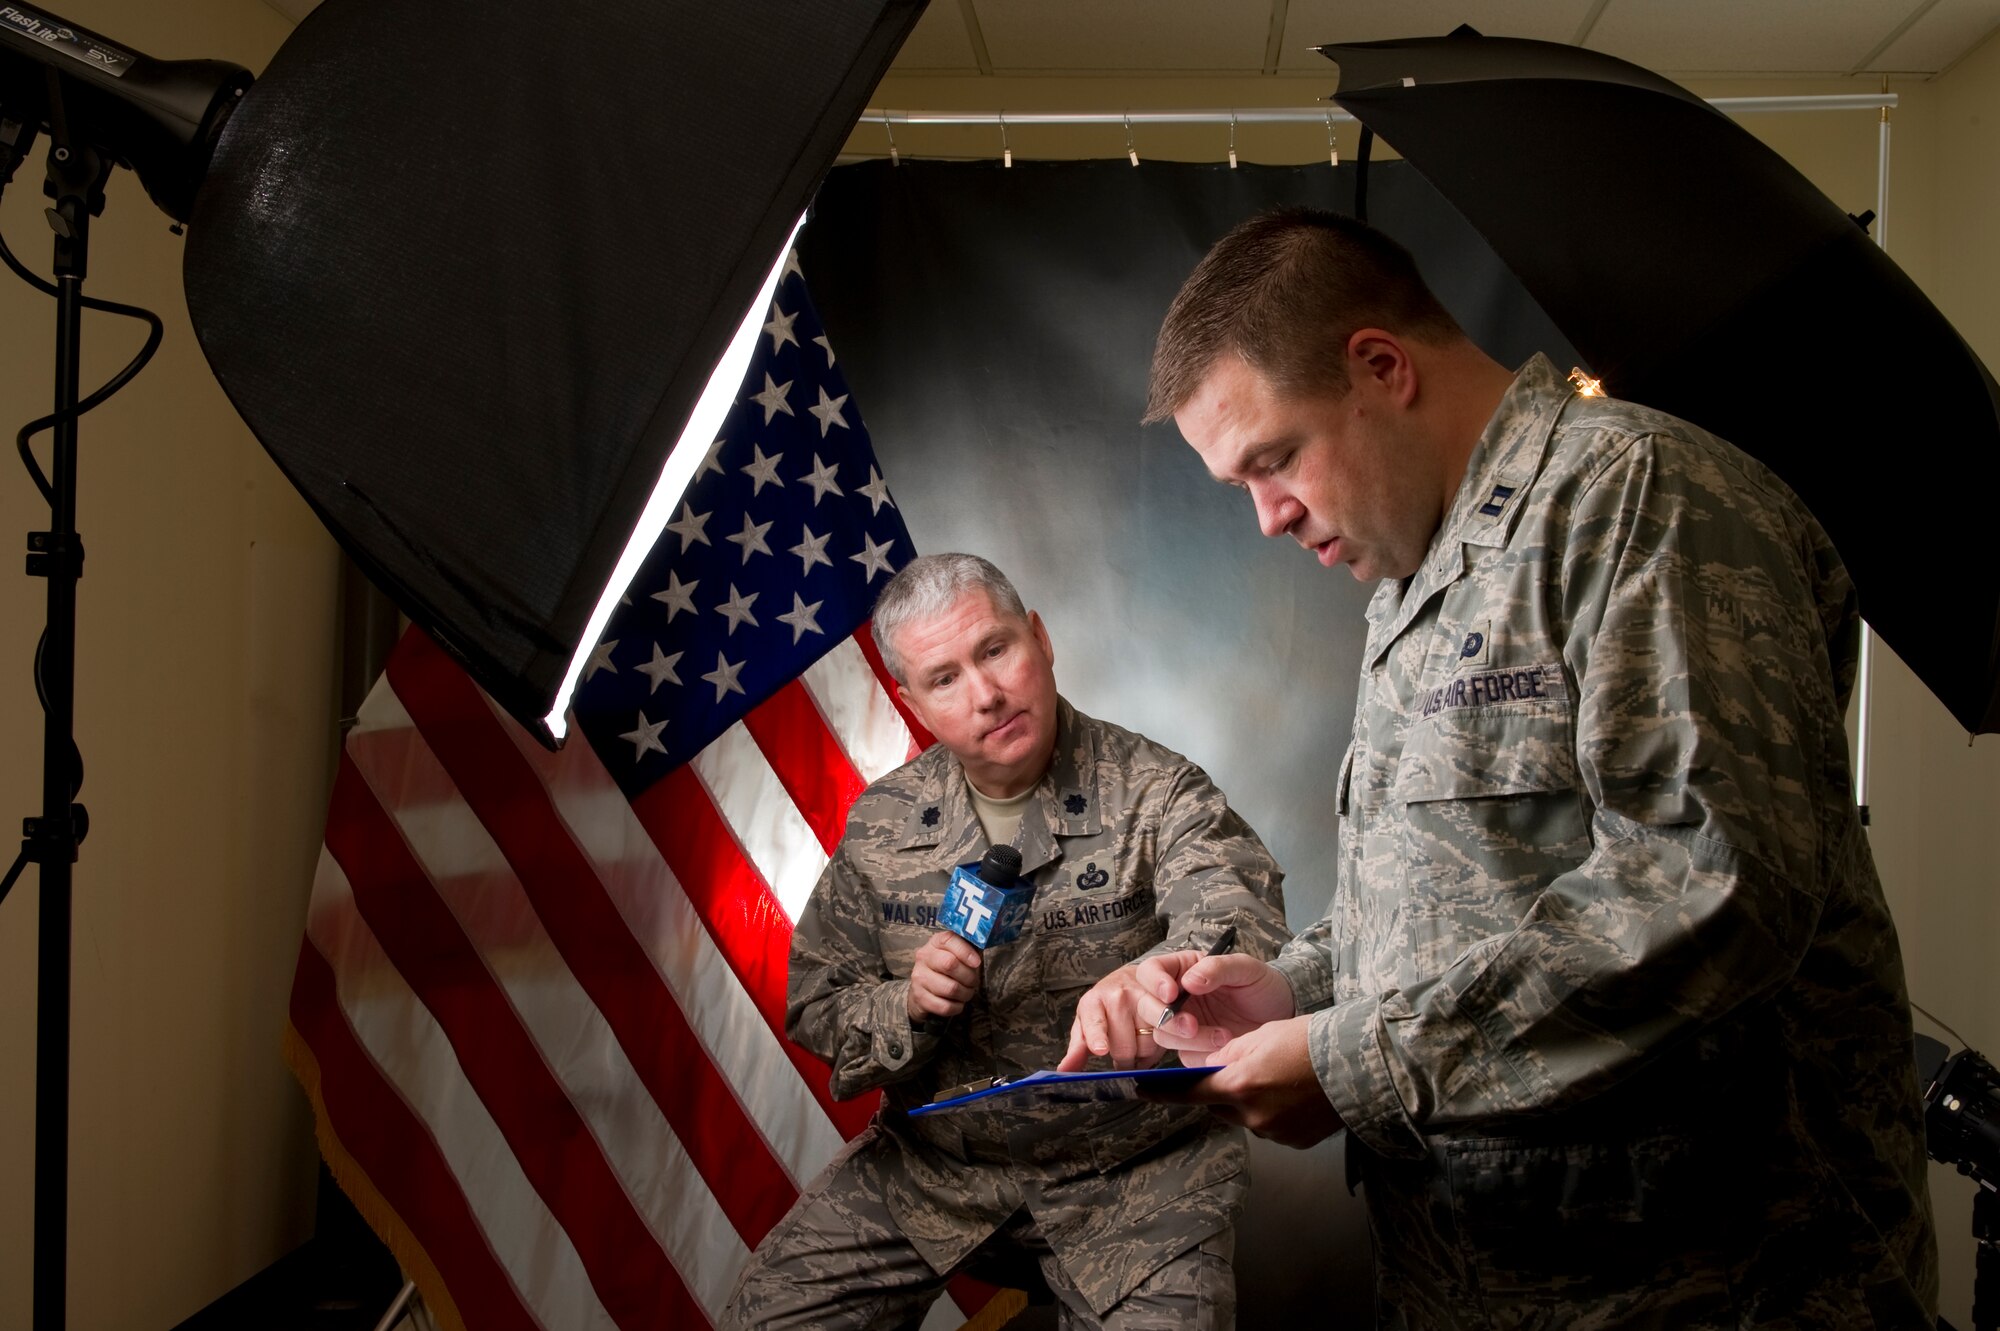 To depict public affairs, Stacy Pearsall depicted Lt. Col. Bill Walsh (left) and Capt. Wayne Capps going over a script in the public affairs studio.  (Courtesy Photo by Stacy Pearsall)